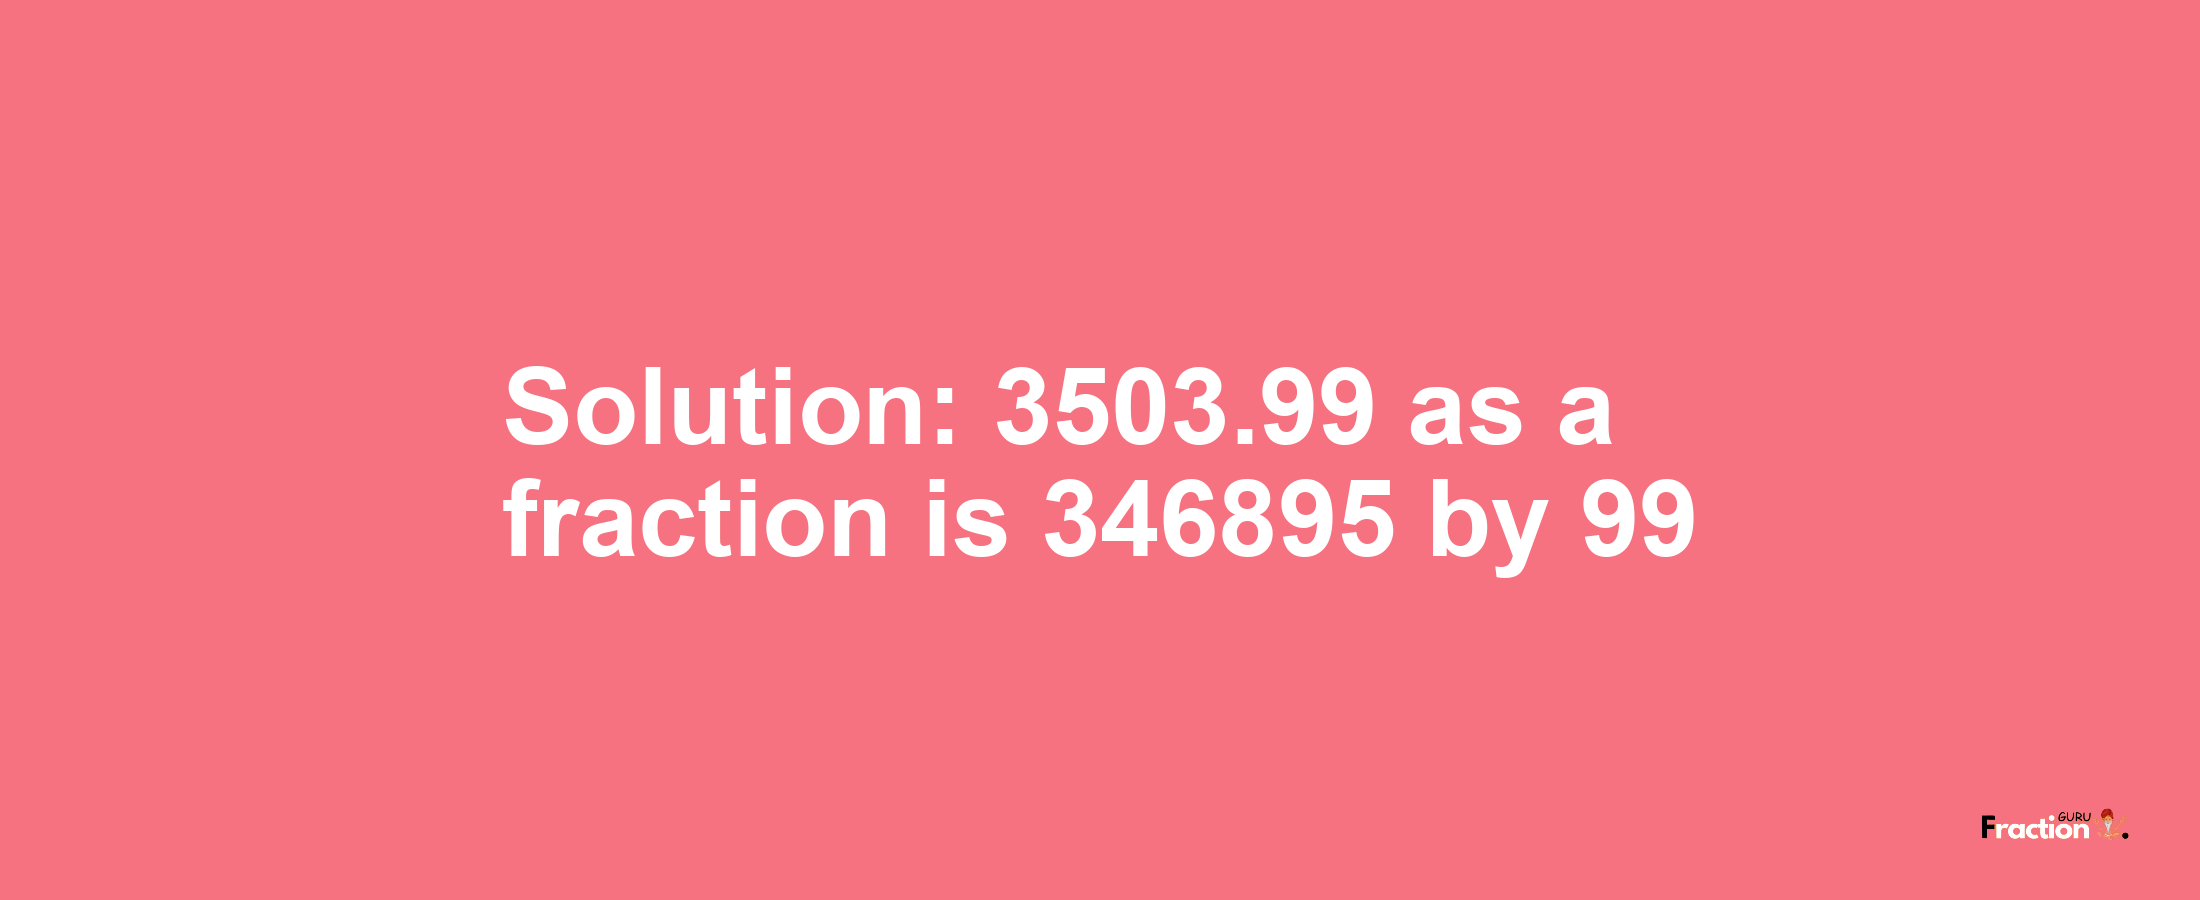 Solution:3503.99 as a fraction is 346895/99